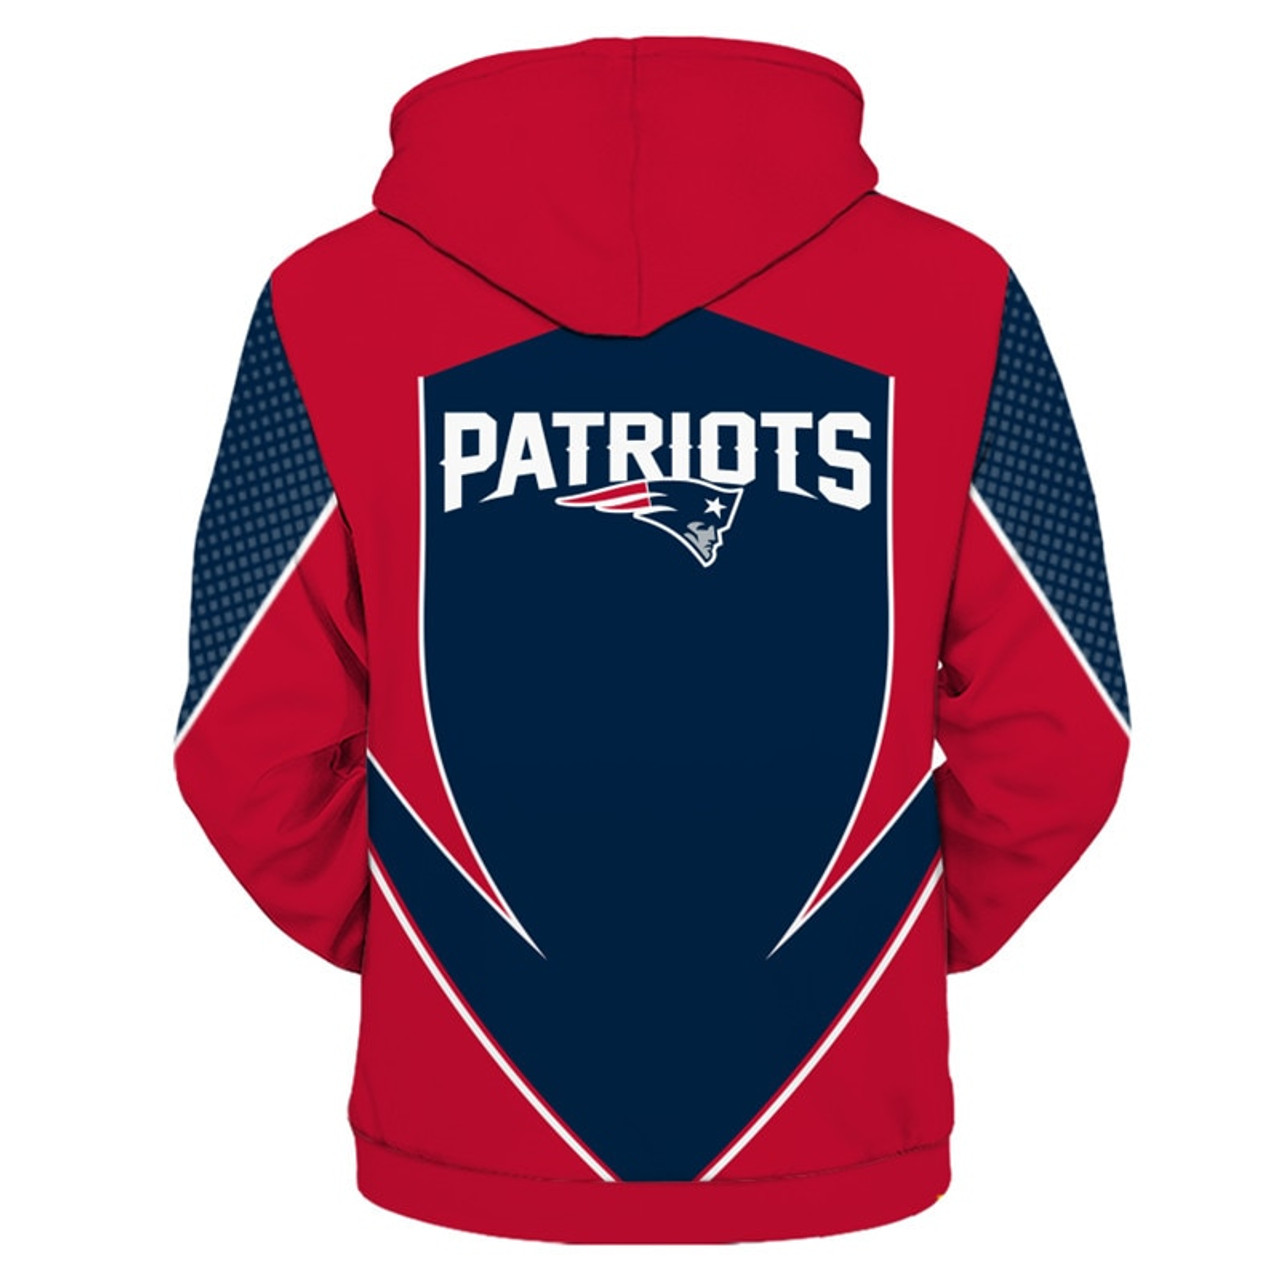 **(OFFICIAL-N.F.L.NEW-ENGLAND-PATRIOTS-TEAM-PULLOVER-HOODIES/NEW-CUSTOM-3D-GRAPHIC-PRINTED-DOUBLE-SIDED-DESIGNED/ALL-OVER-OFFICIAL-PATRIOTS-LOGOS & IN-PATRIOTS-TEAM-COLORS/WARM-PREMIUM-OFFICIAL-N.F.L.PATRIOTS-TEAM,PULLOVER-DEEP-POCKET-HOODIES)** 